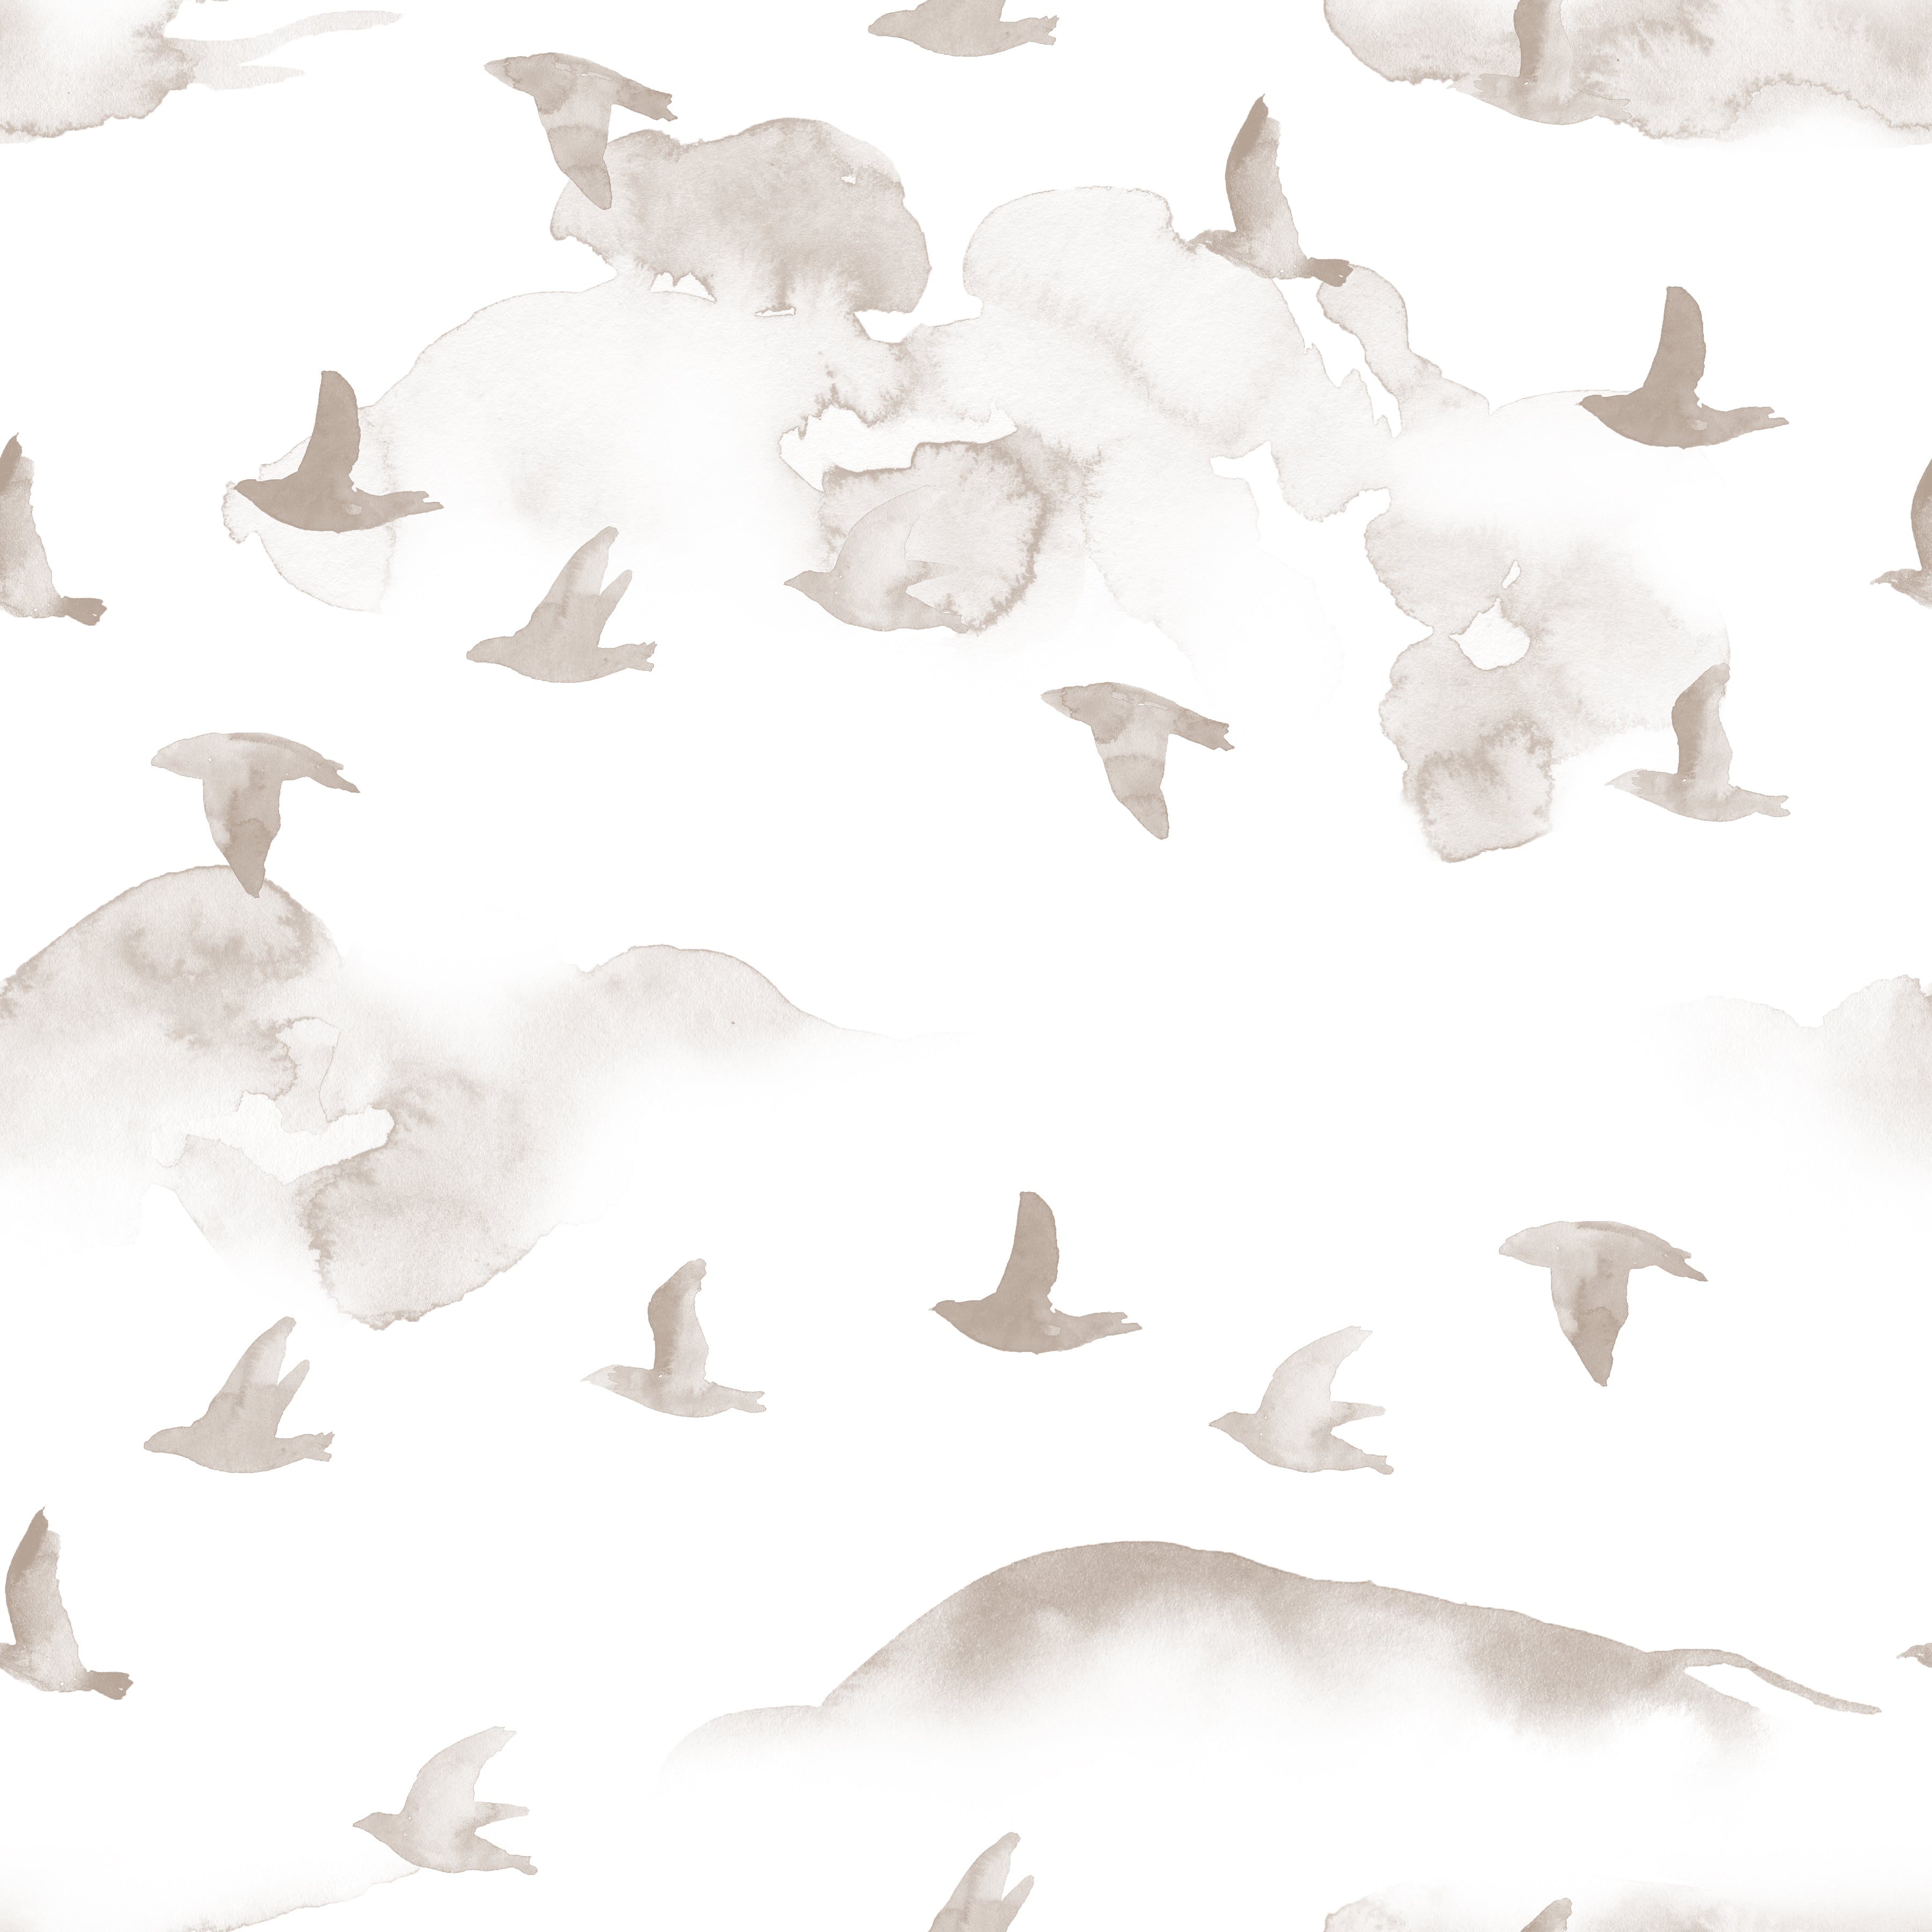 a minimalist watercolor wallpaper design from the Kids Wild Pinery collection, featuring soft beige silhouettes of flying and perched birds scattered across a clean white background. The subtle, naturalistic pattern evokes the serene ambiance of a pine forest alive with the gentle activity of its avian inhabitants.